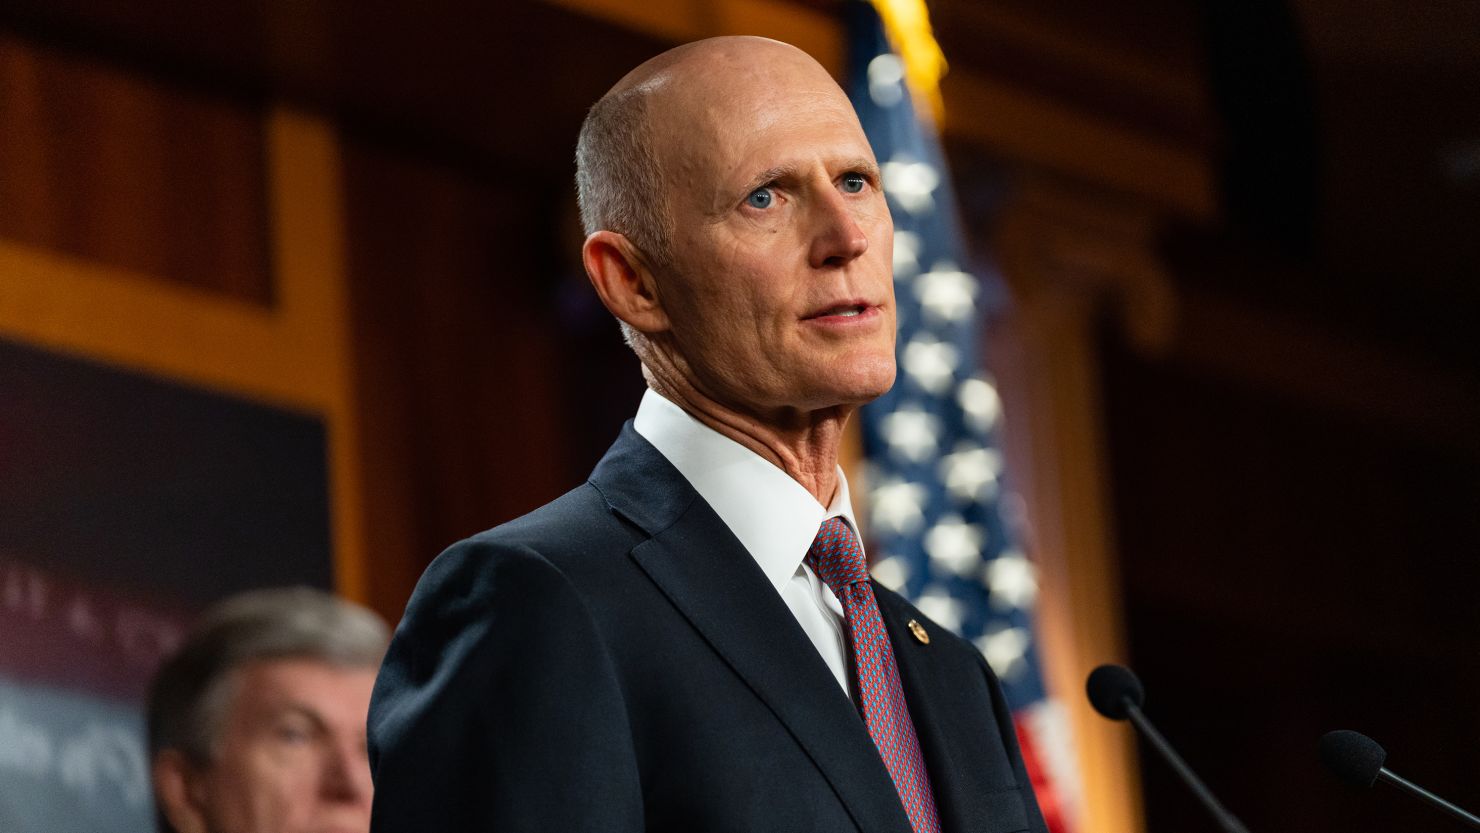 Florida Sen. Rick Scott speaks during a news conference at the US Capitol on July 26, 2022.